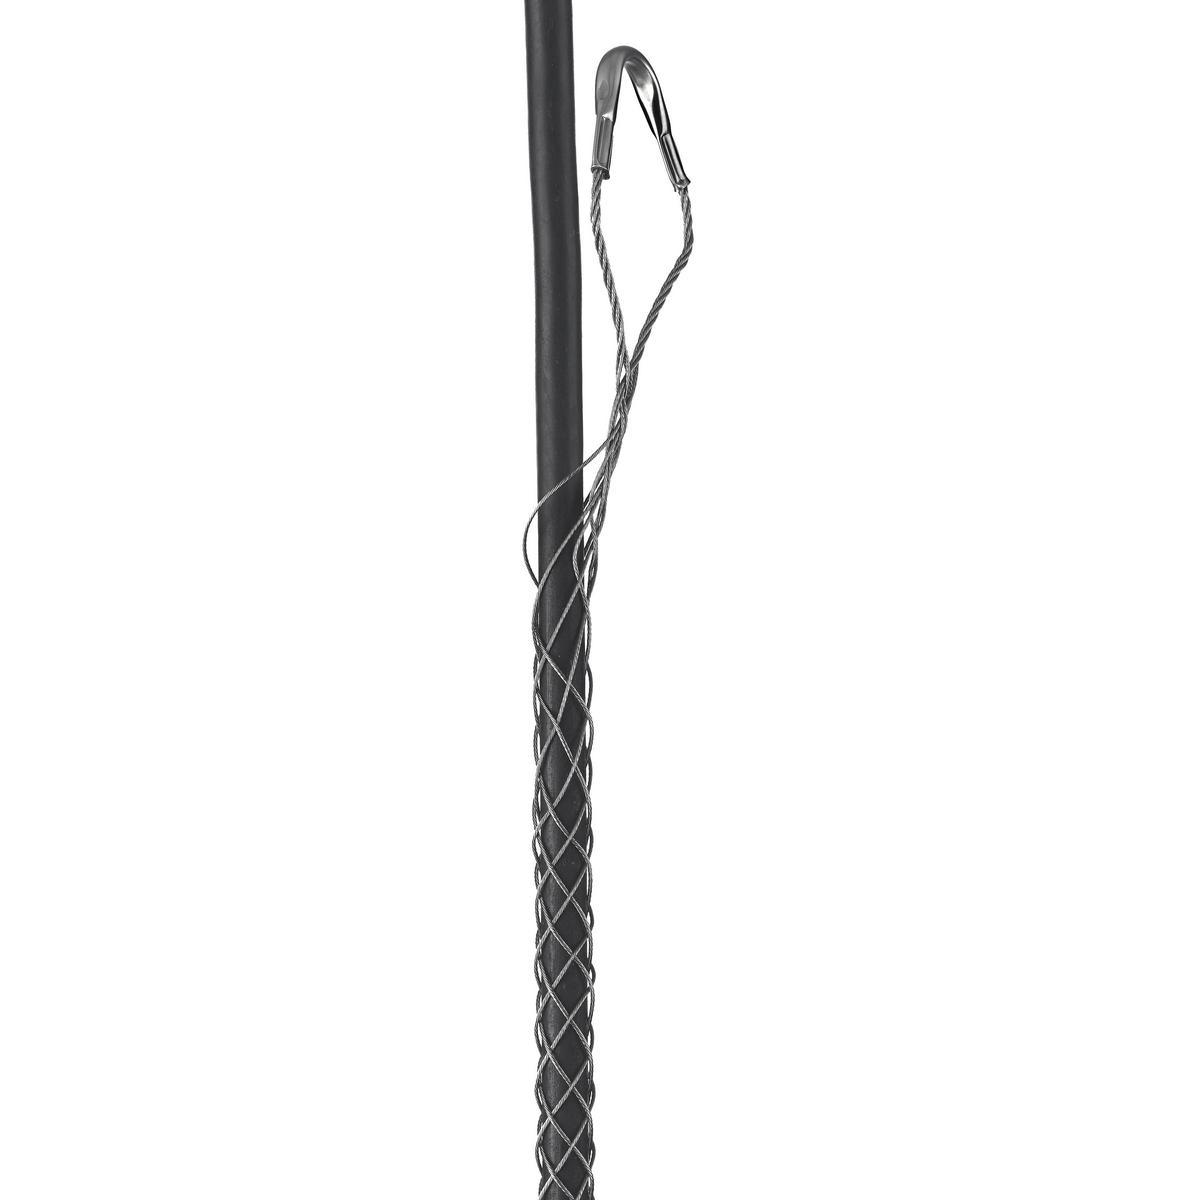 Hubbell 02401045 Support Grips, Offset Eye, Single Weave, Closed Mesh, Stainless Steel, 2.00-2.49"  ; Offset eye ; Strand equalizers position wires for equal loading throughout grip length ; Eye assemblies provide eye reinforcement at support hardware ; Closed Mesh